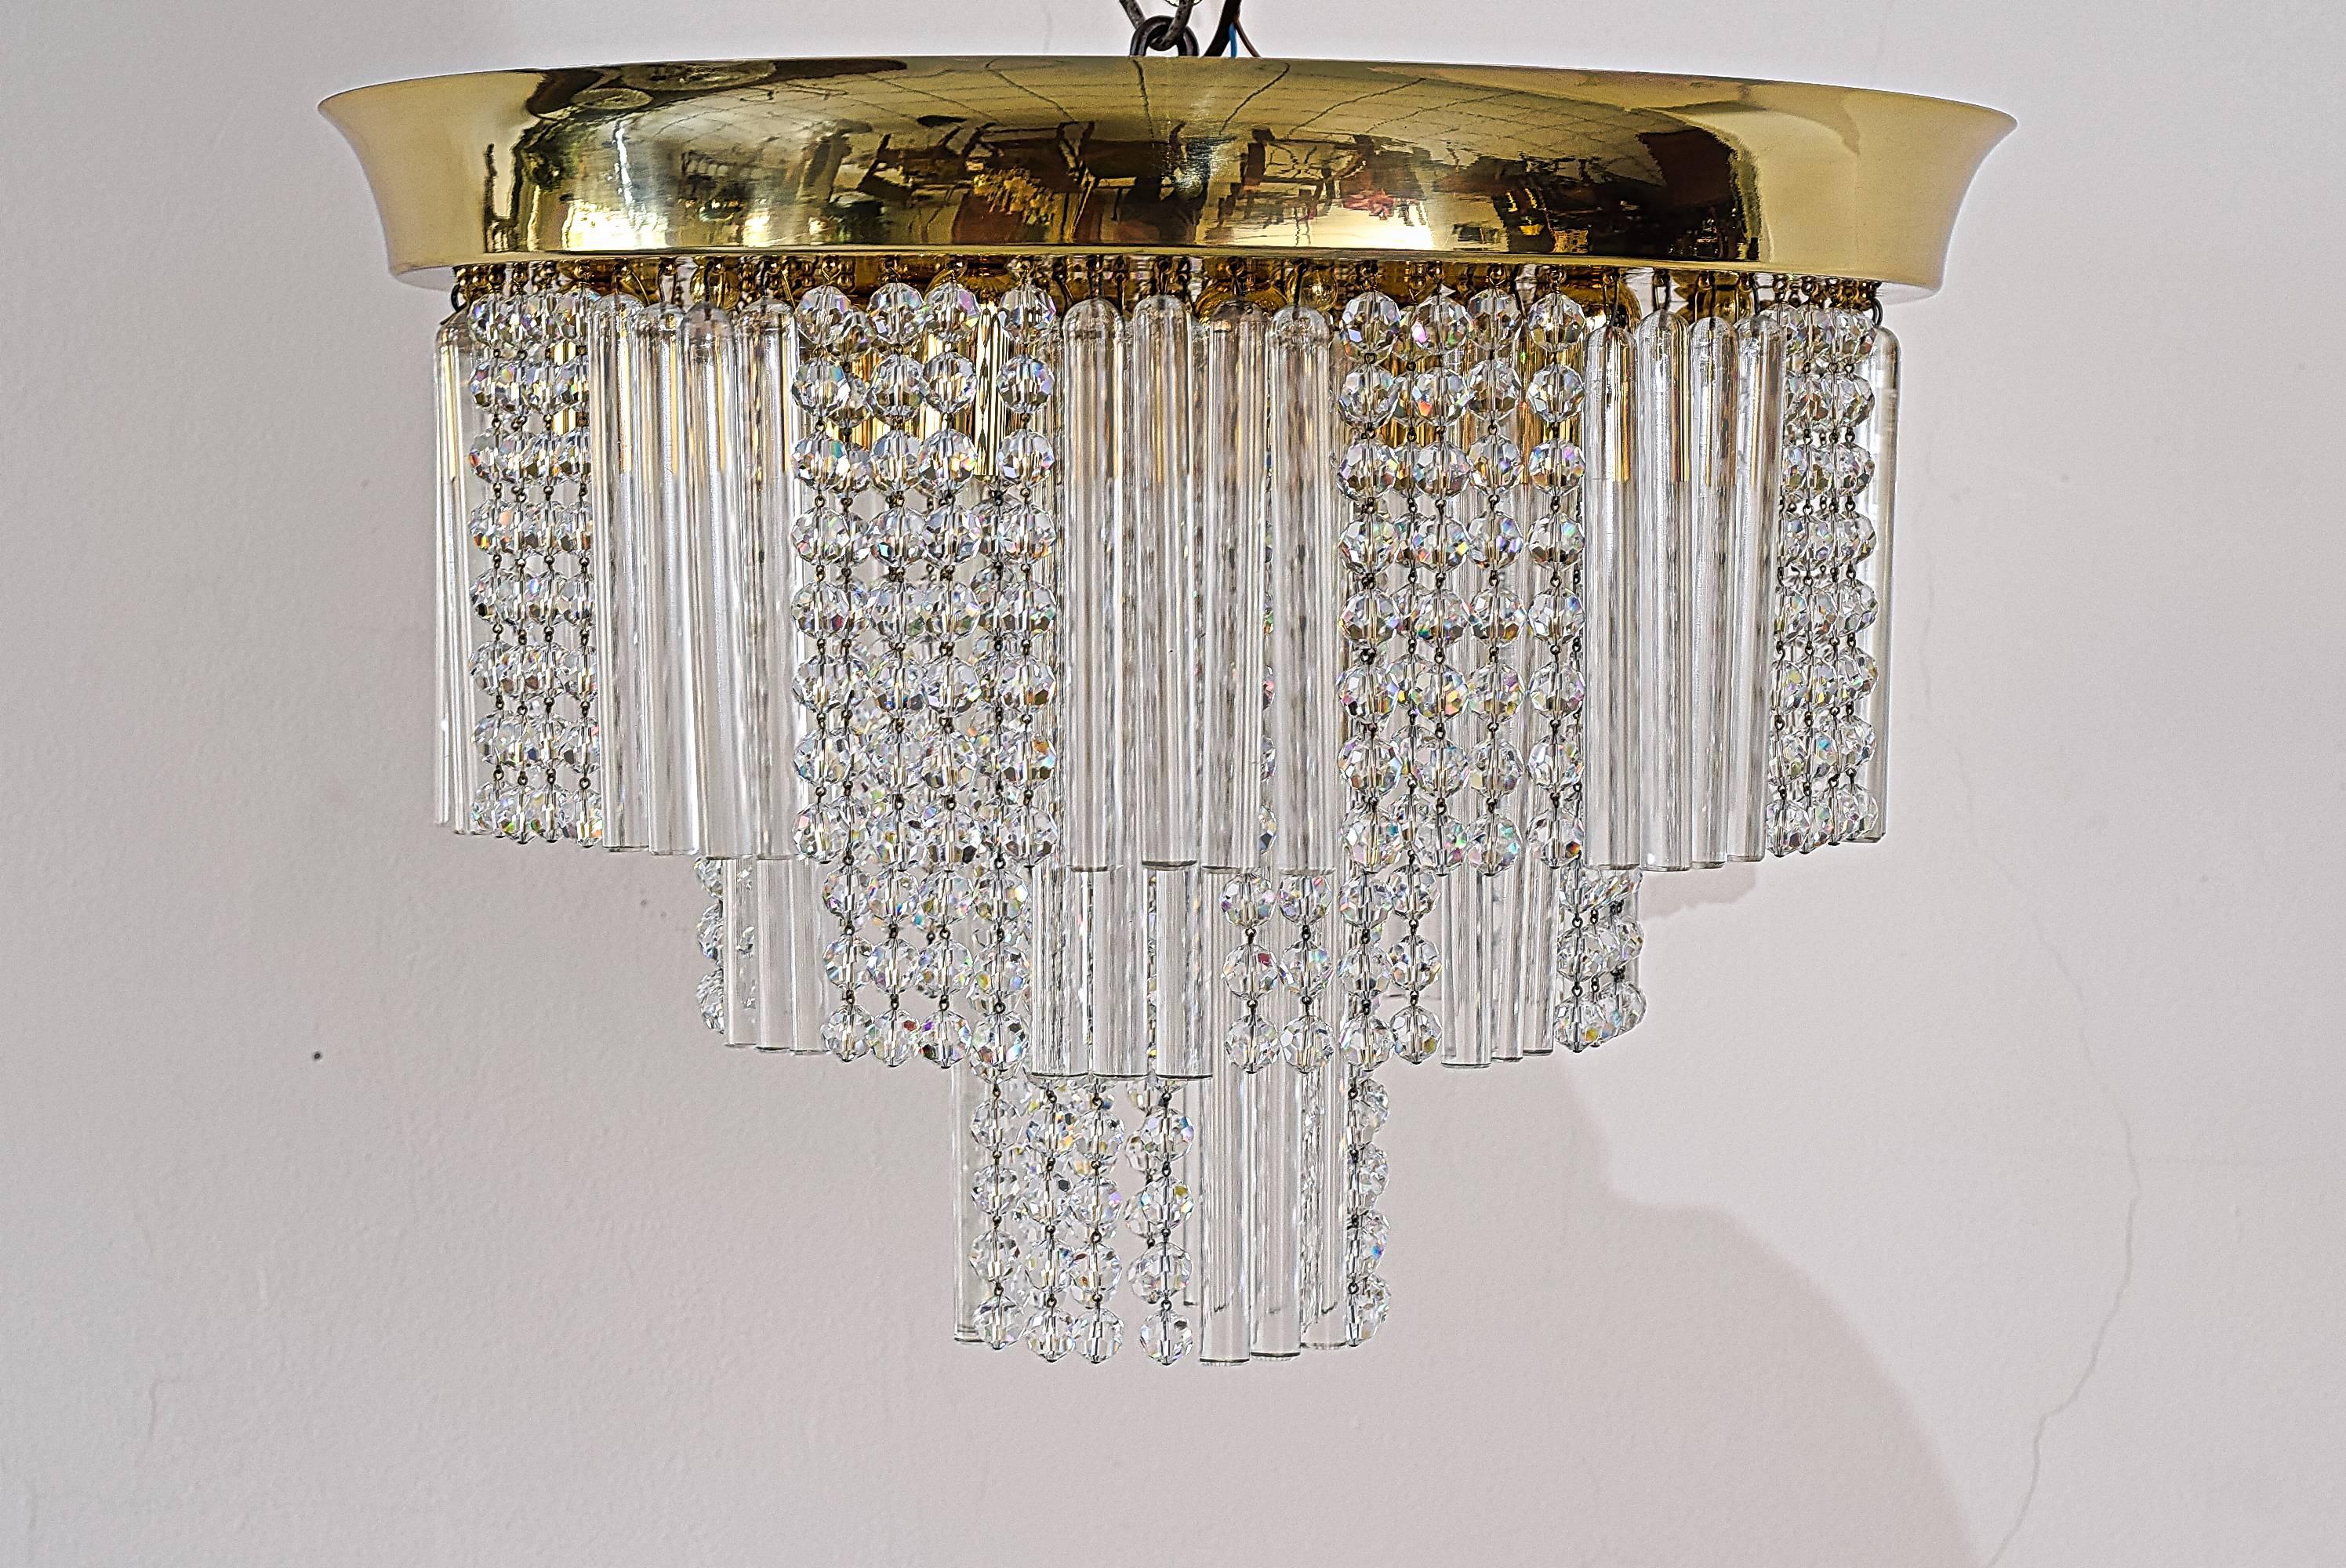 Huge Kalmar three-tier glass flush mount with crystals.
Polished and stove enameled.
The chandelier is lighted with nine bulbs.
3 are available, priced and sold per piece.

